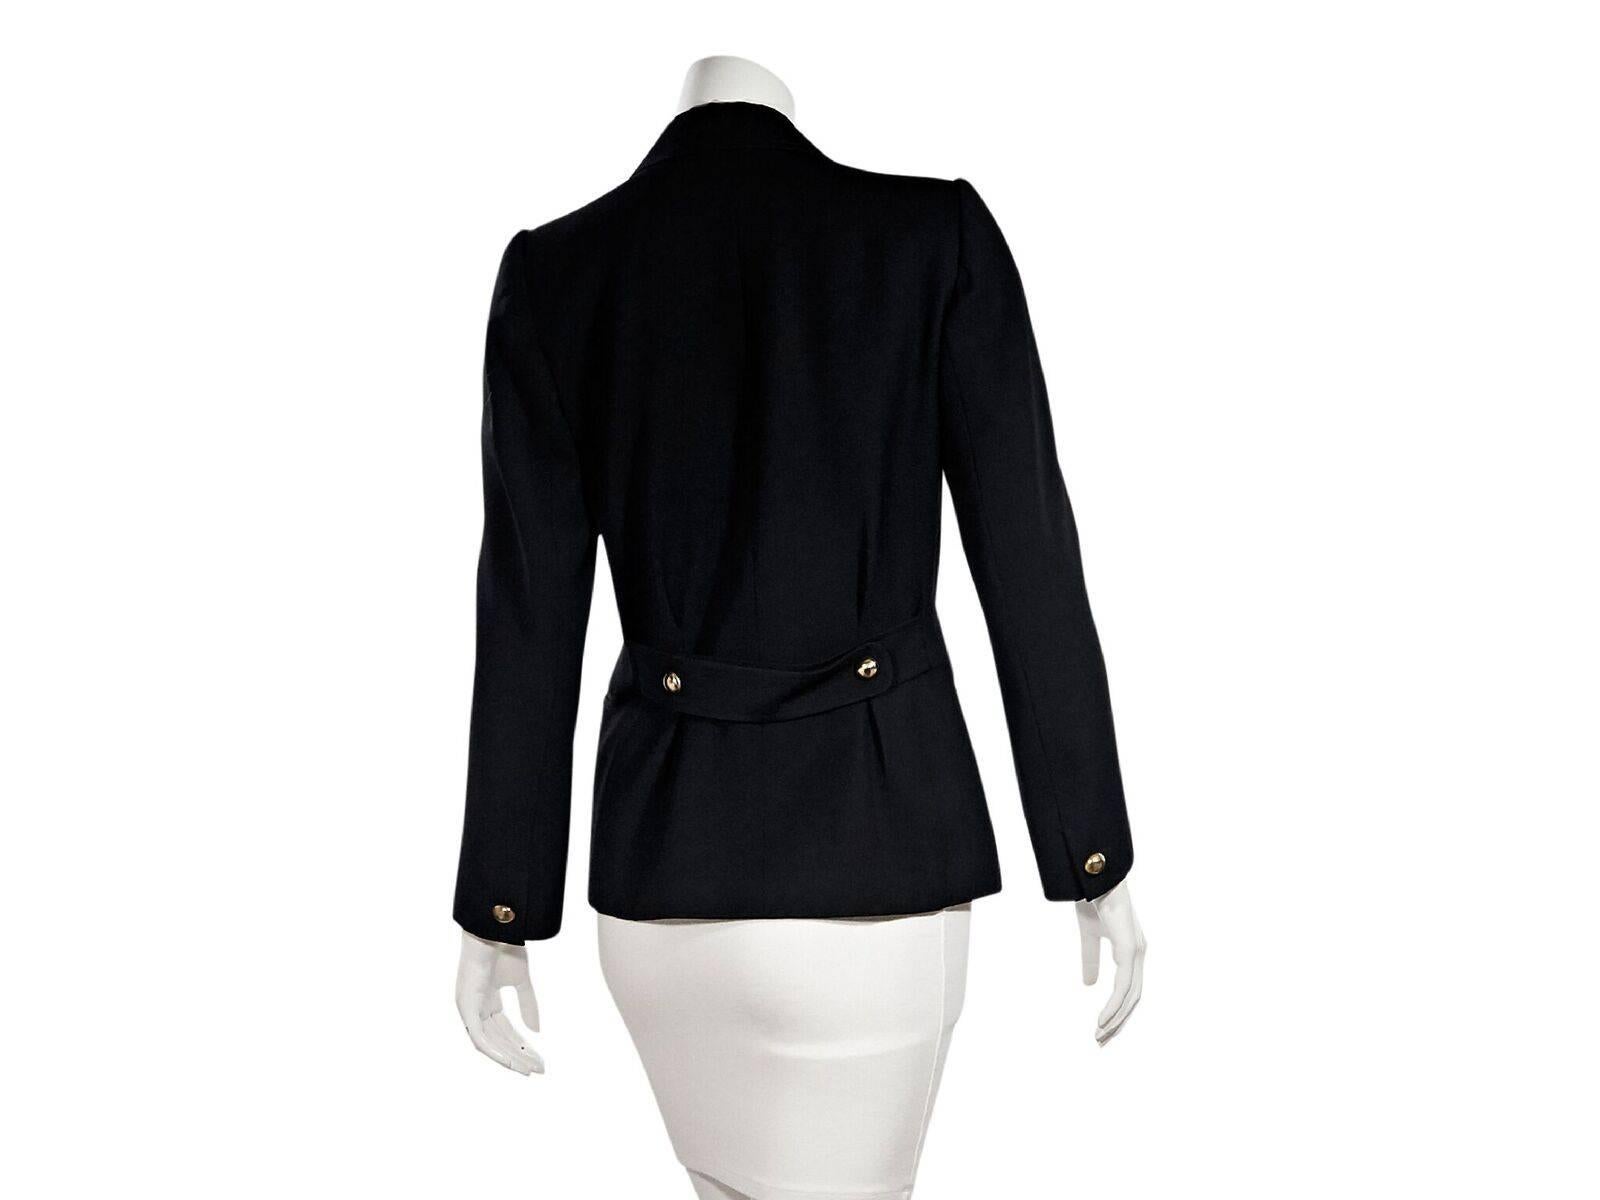 Product details:  Vintage black blazer by Yves Saint Laurent.  Notched lapel.  Long sleeves.  Single button cuffs.  Double-breasted button-front closure.  Besom chest and waist pockets.  Label size FR 36.  36